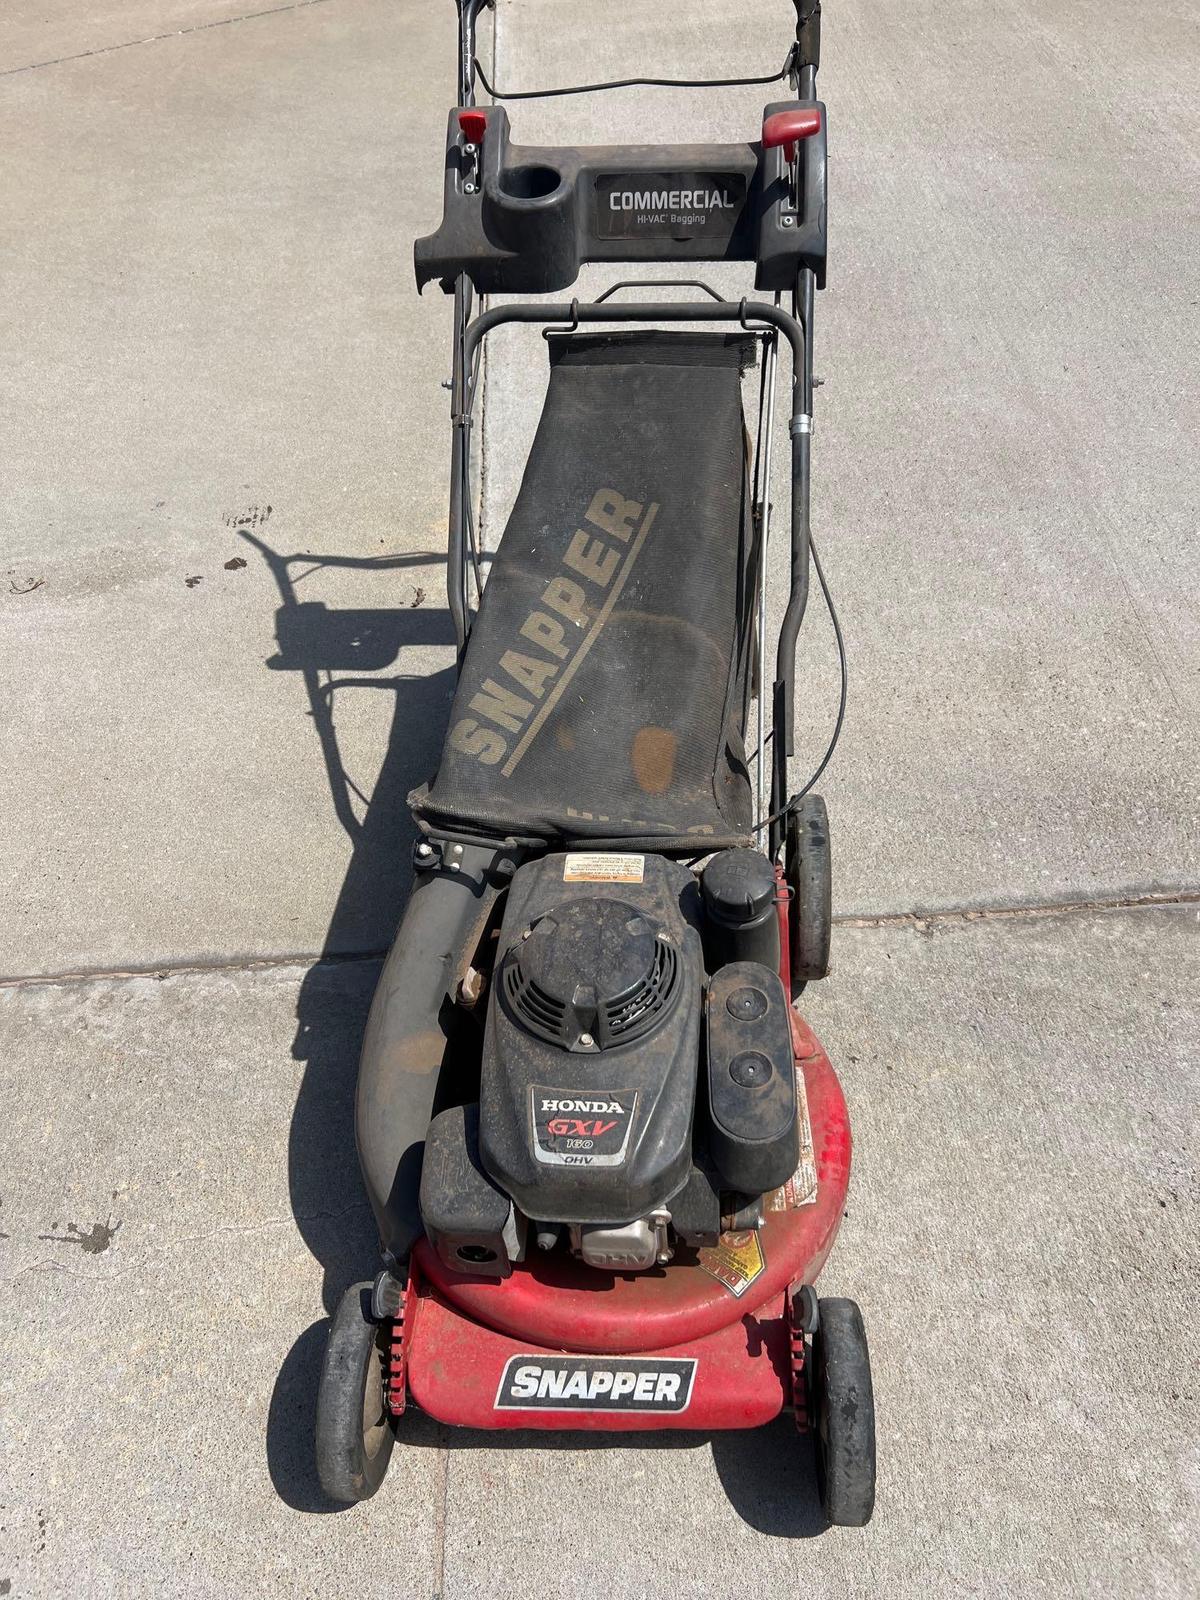 Snapper commercial push mower with bagger